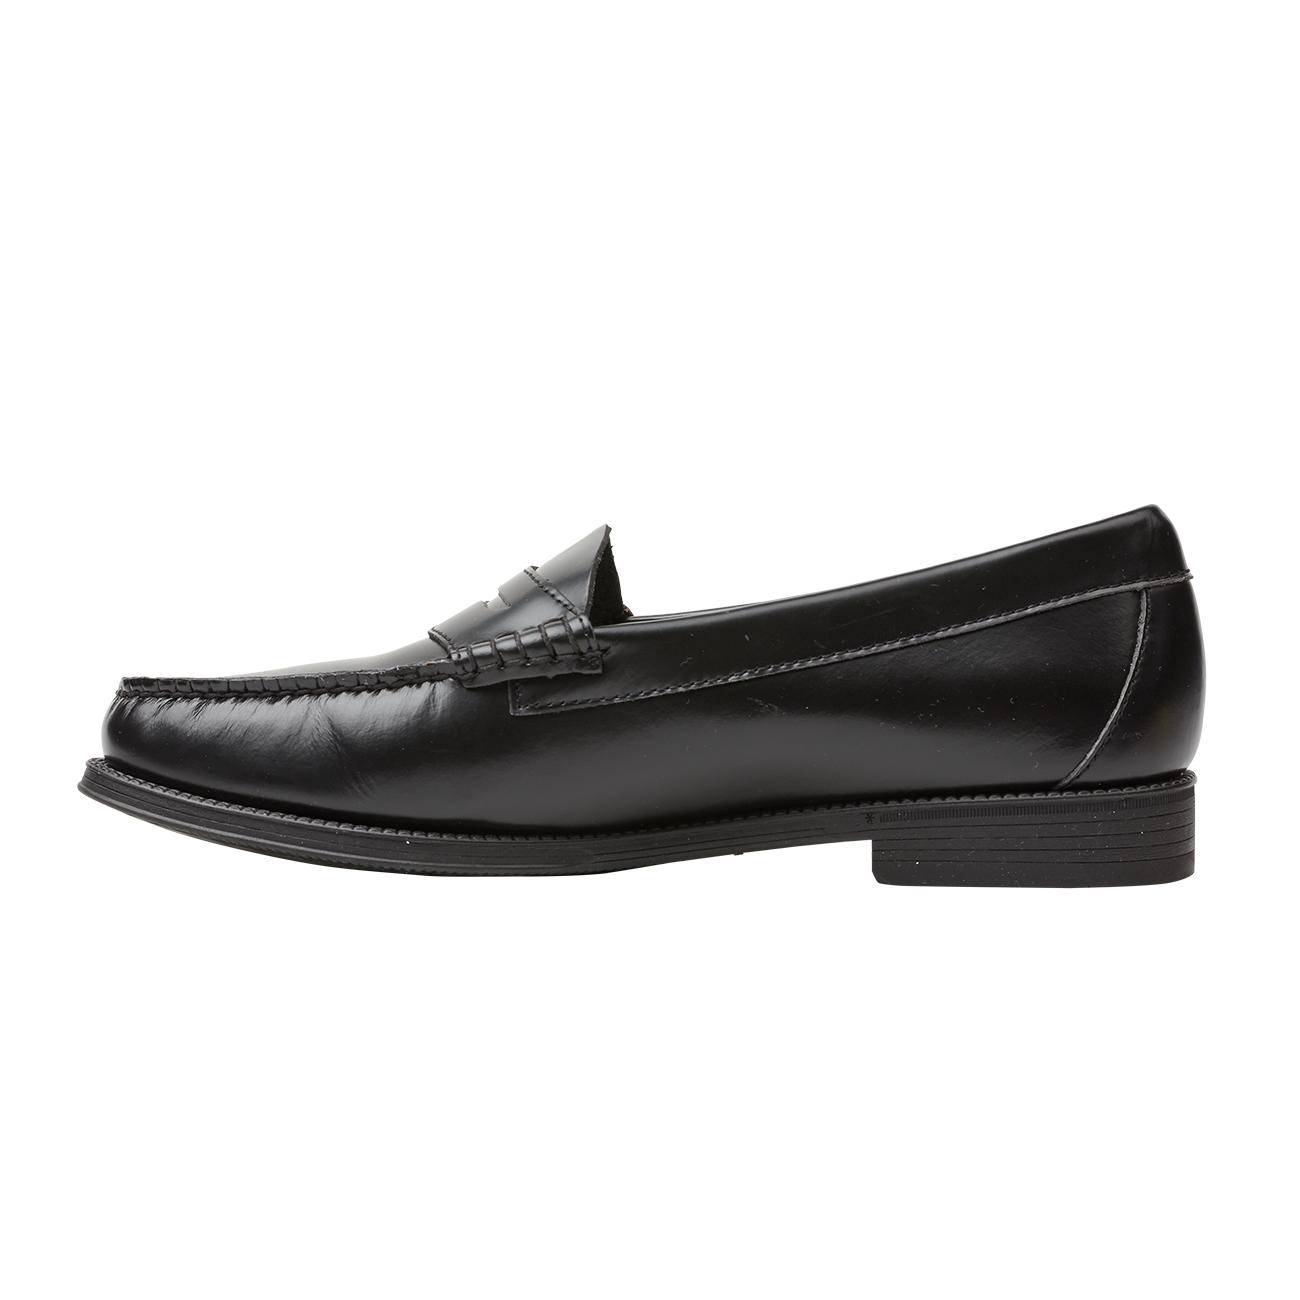 G. H. Bass Penny Loafers “Weejuns” discover